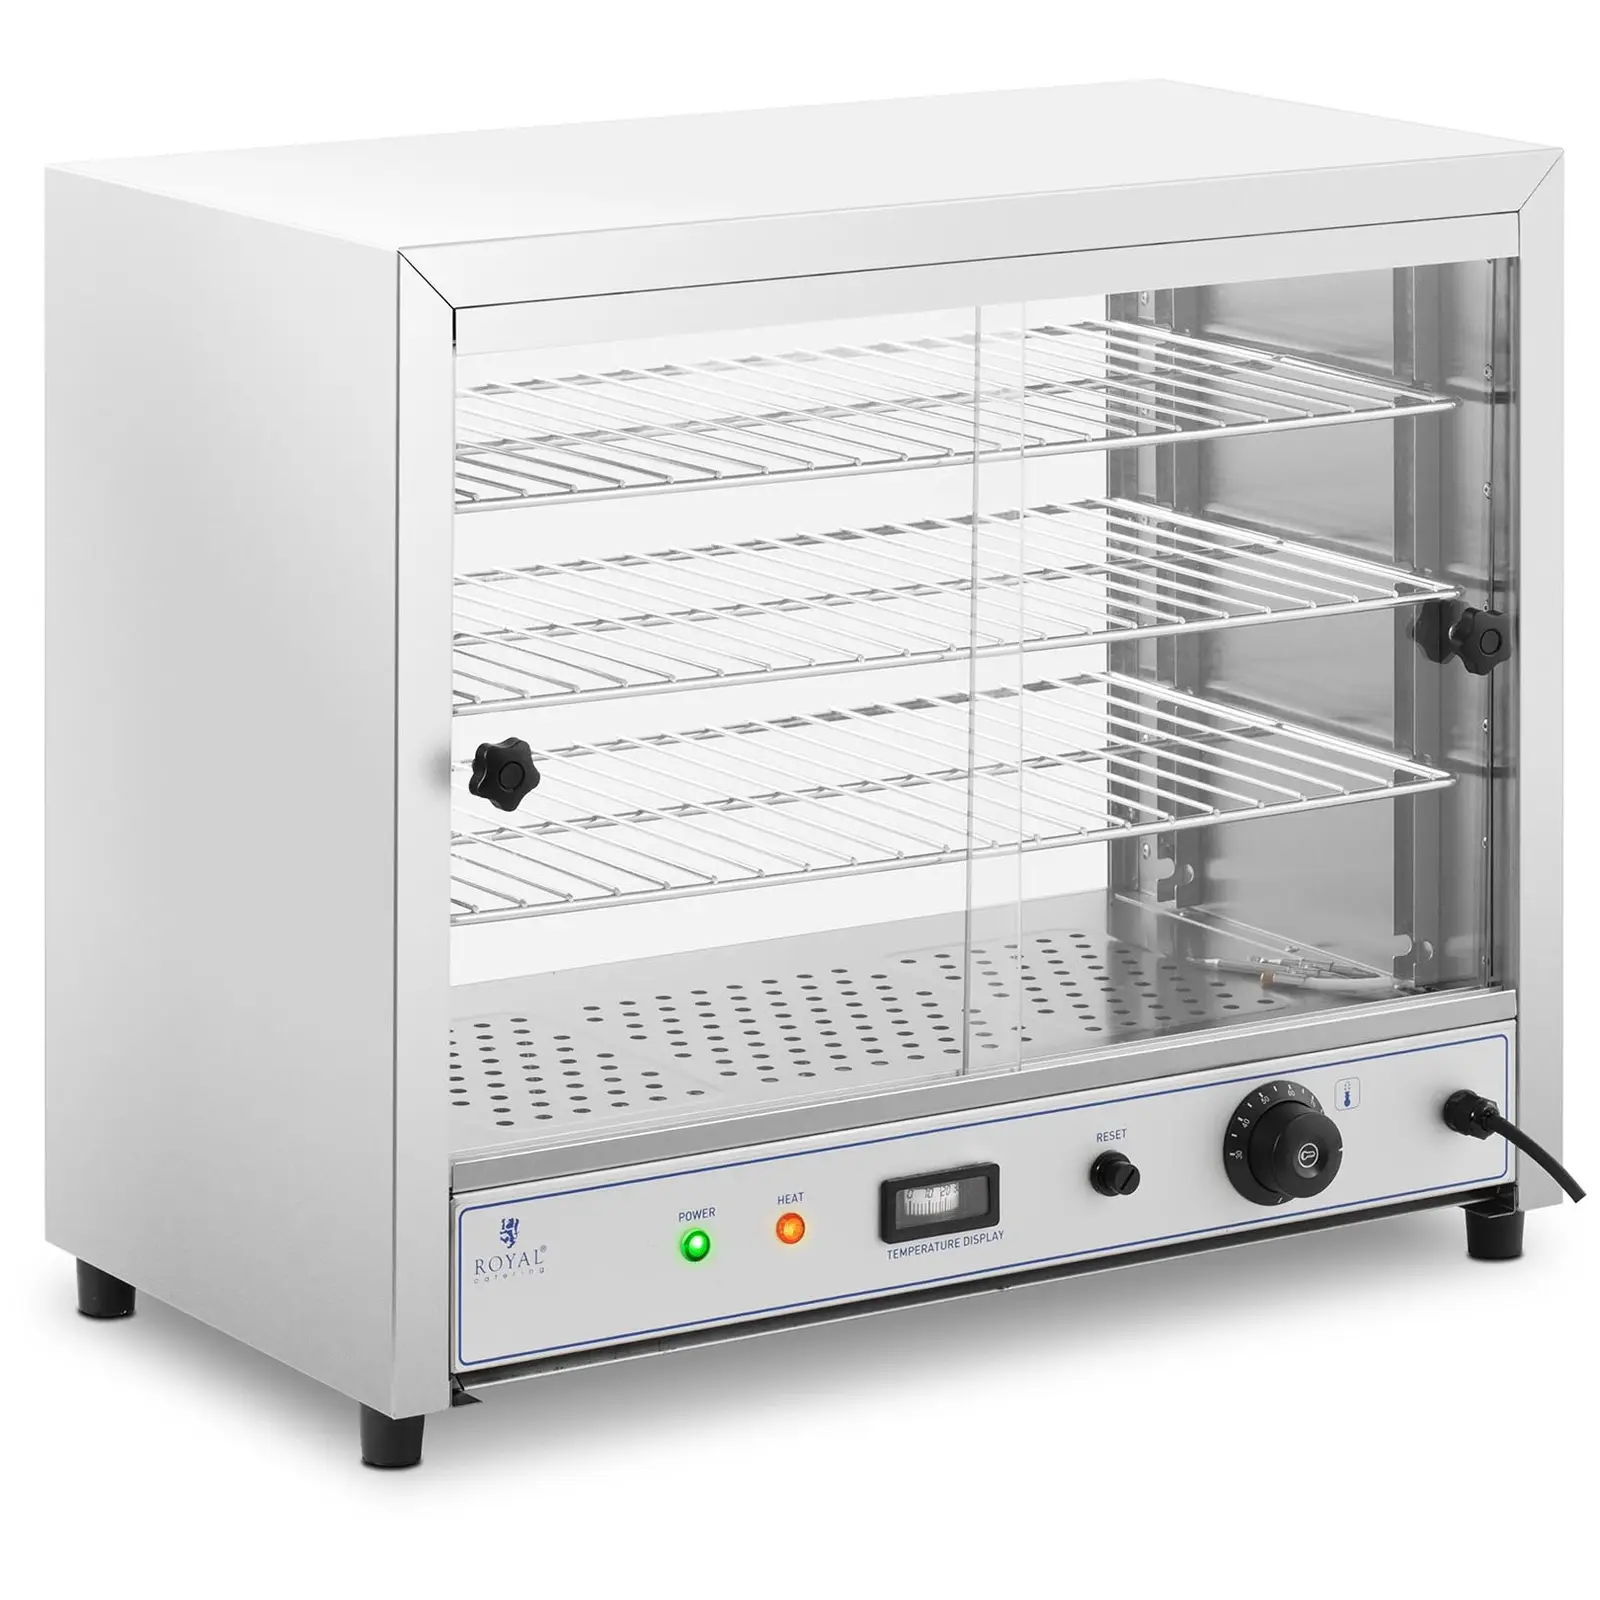 Factory second Hot Food Display - 54 cm - Royal Catering - 1,000 W - 3 racks